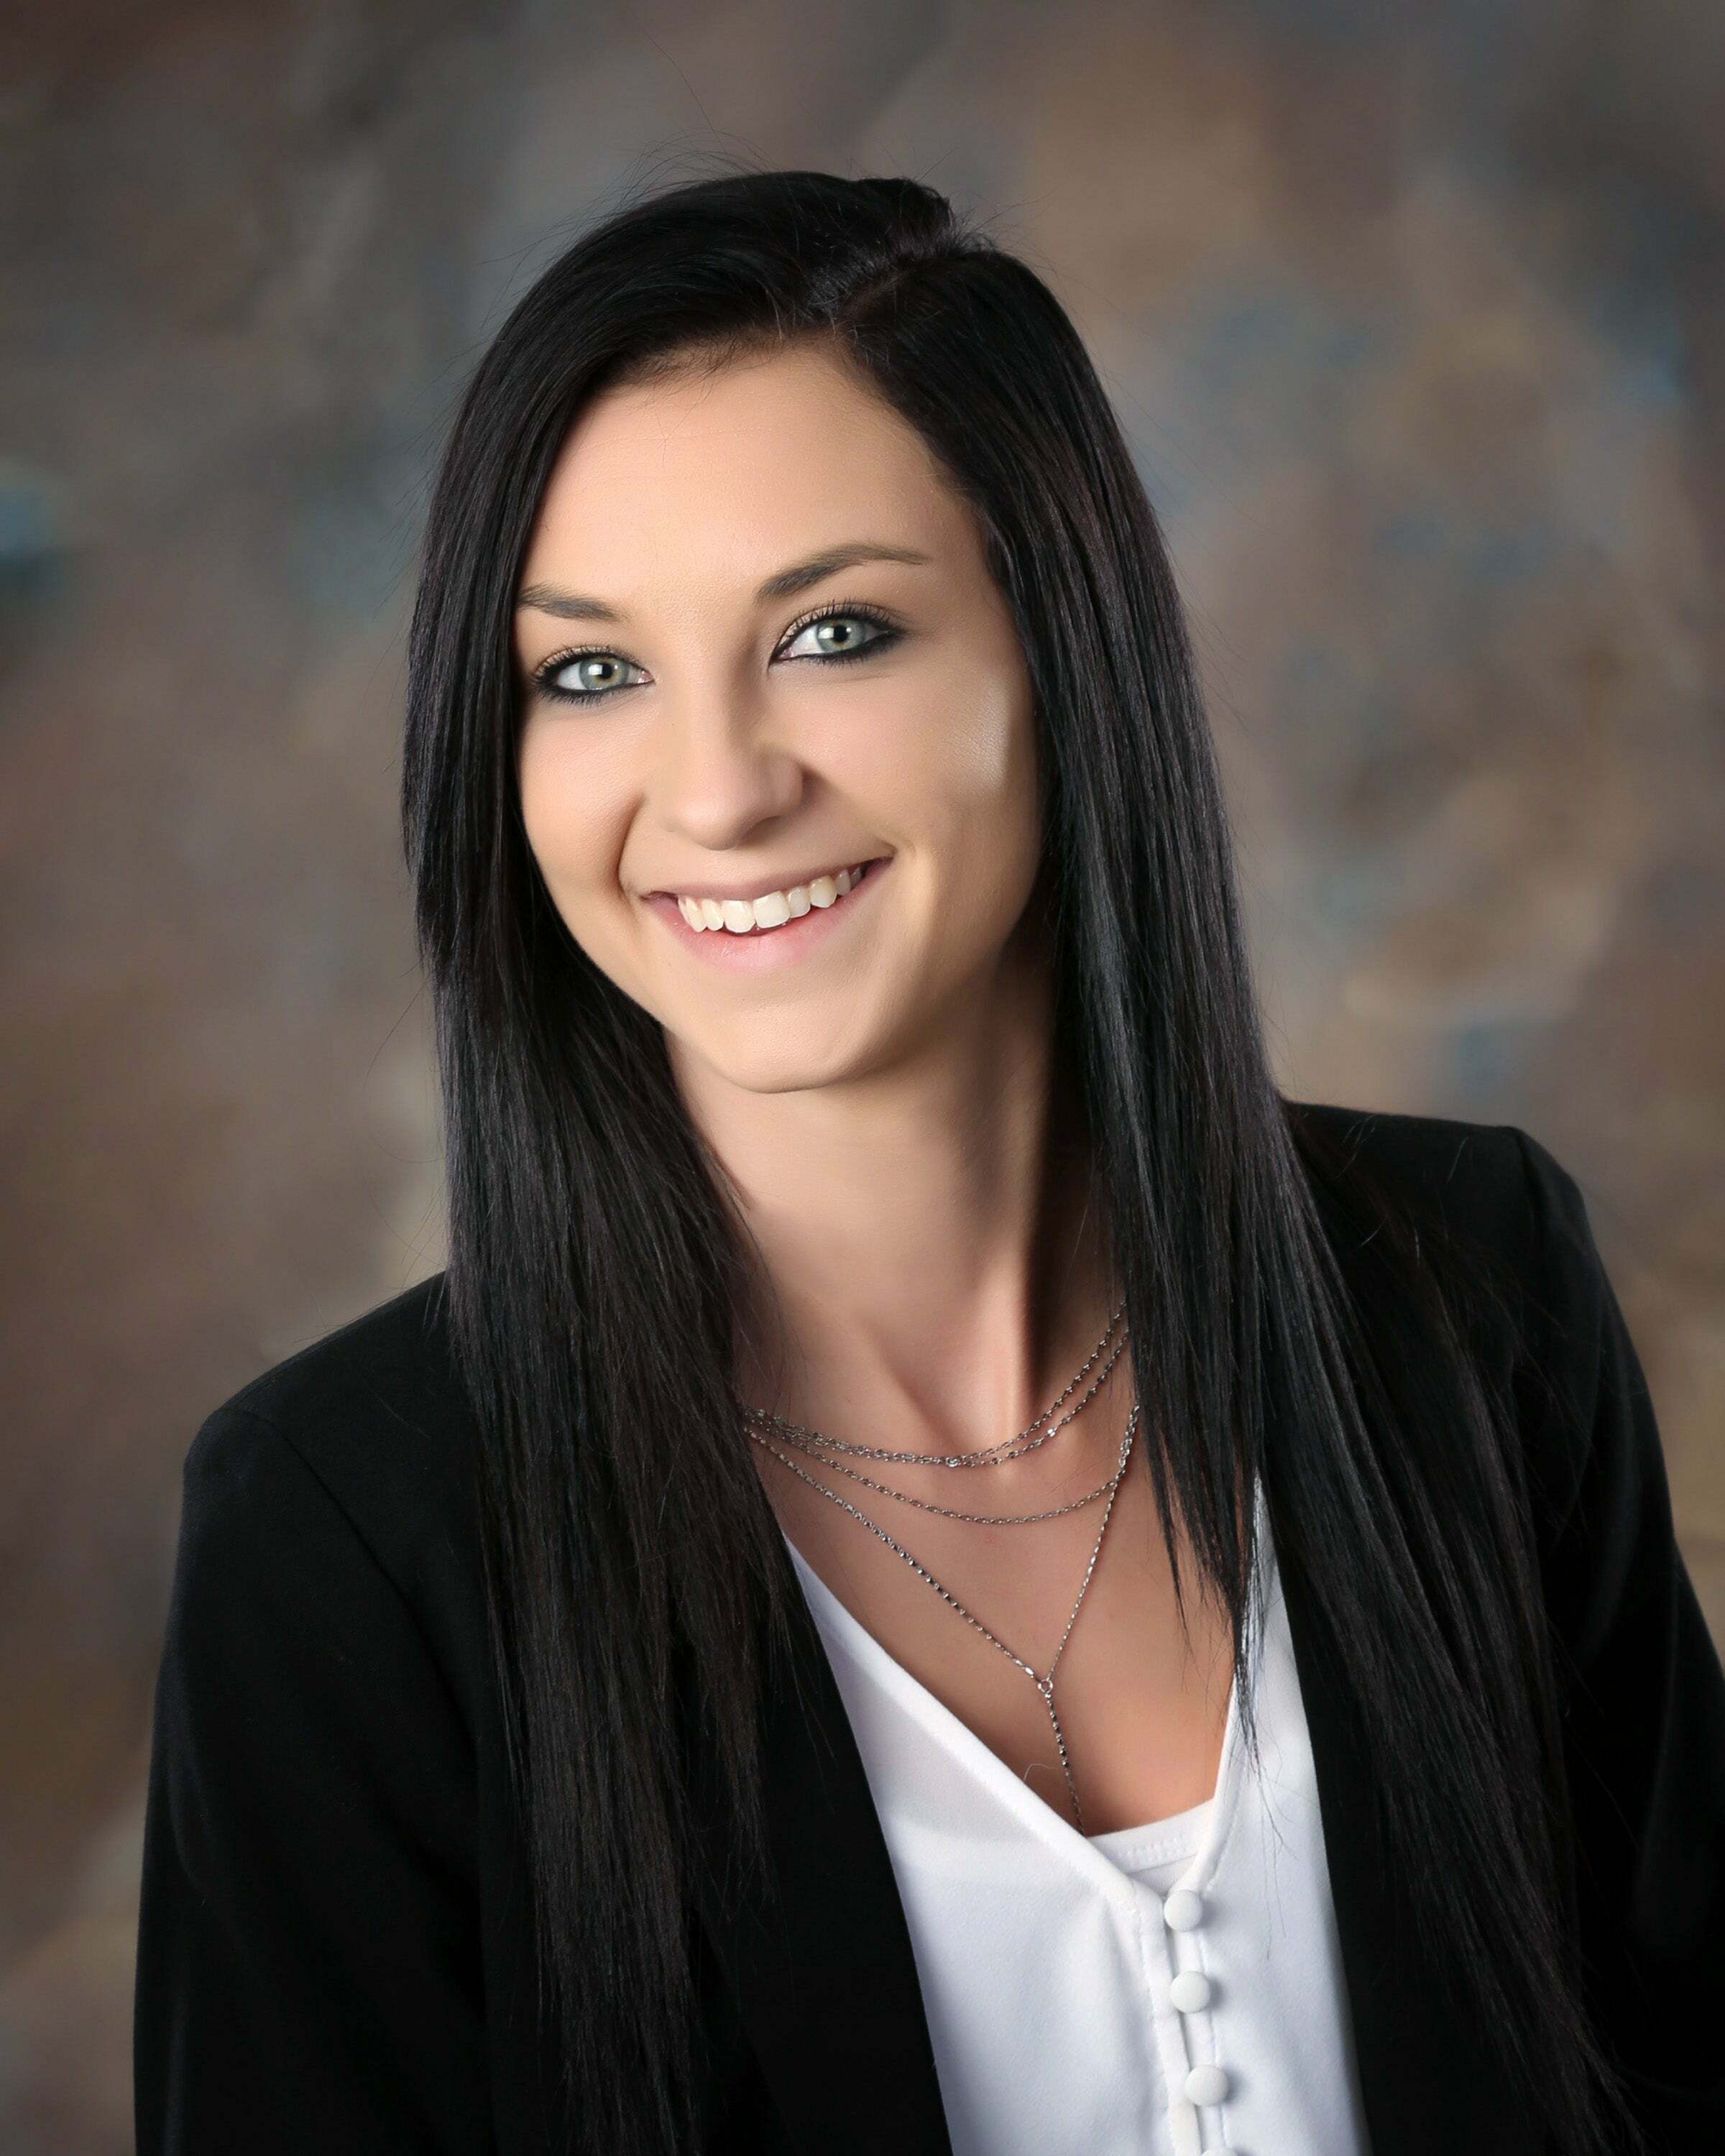 Katie Irwin, Real Estate Salesperson in Sioux City, Associated Brokers Realty, Inc.